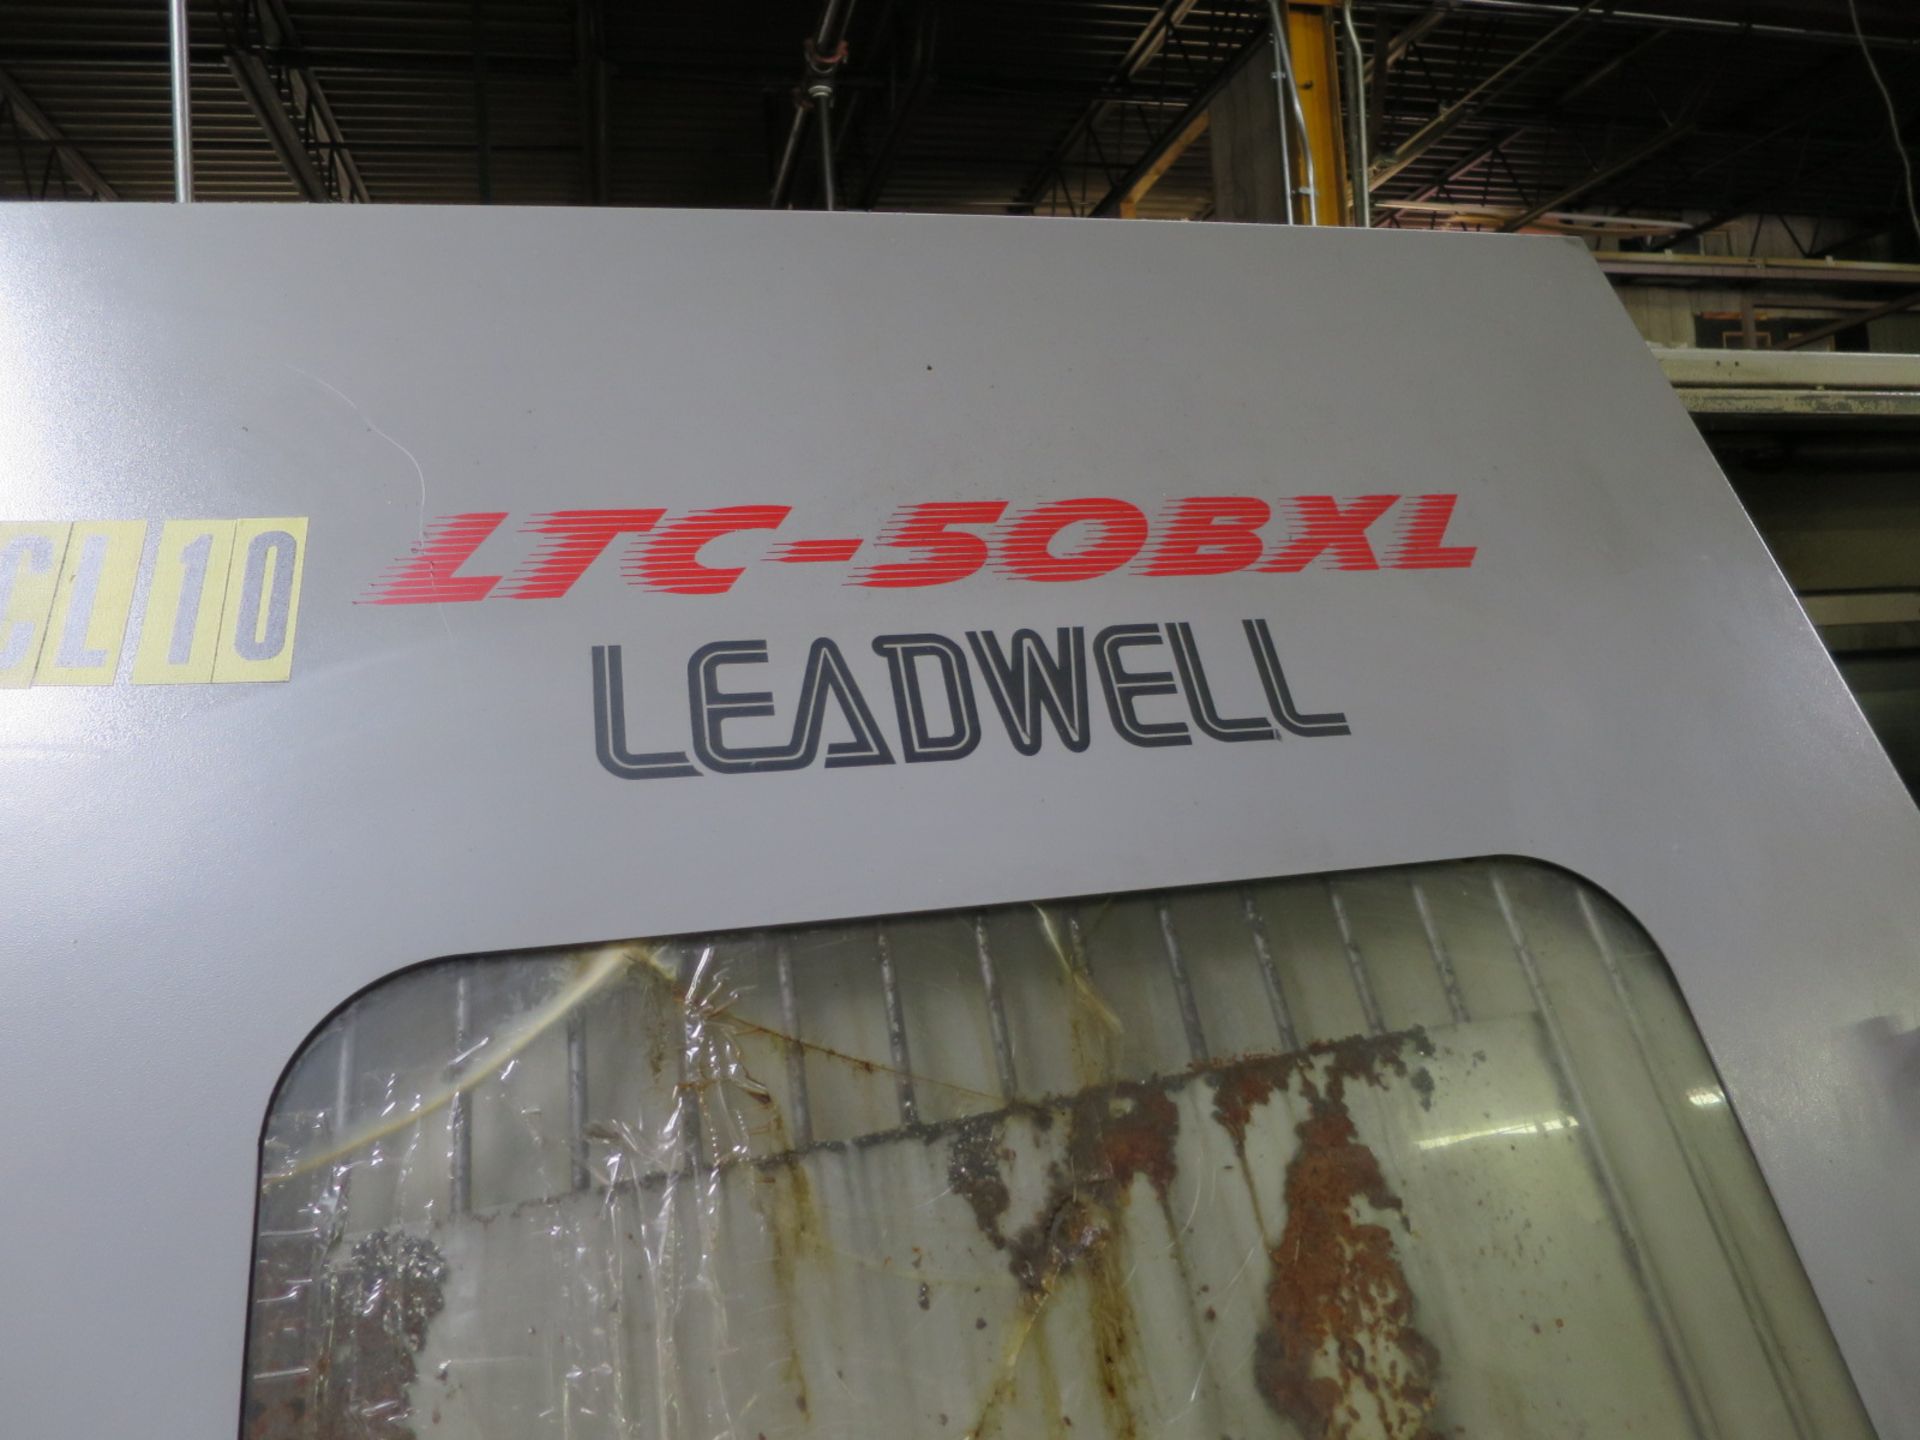 31.5"x118" Leadwell LTC-50BXL 2-Axis CNC Lathe Turning Center, S/N LT2JF0783, New 2006 General - Image 8 of 9